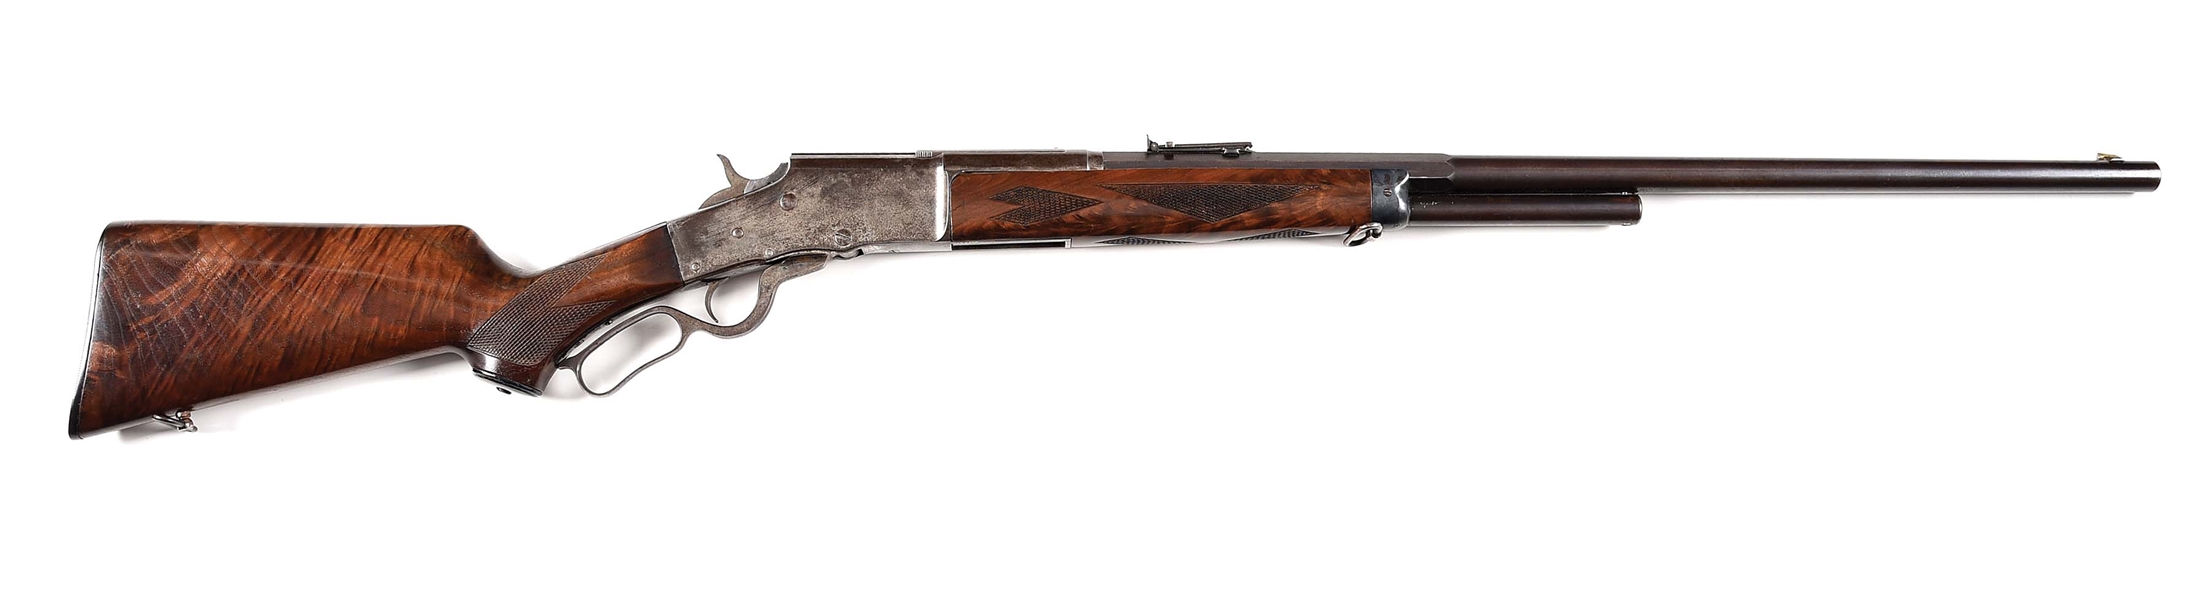 (A) BULLARD REPEATING ARMS DELUXE LEVER ACTION RIFLE.